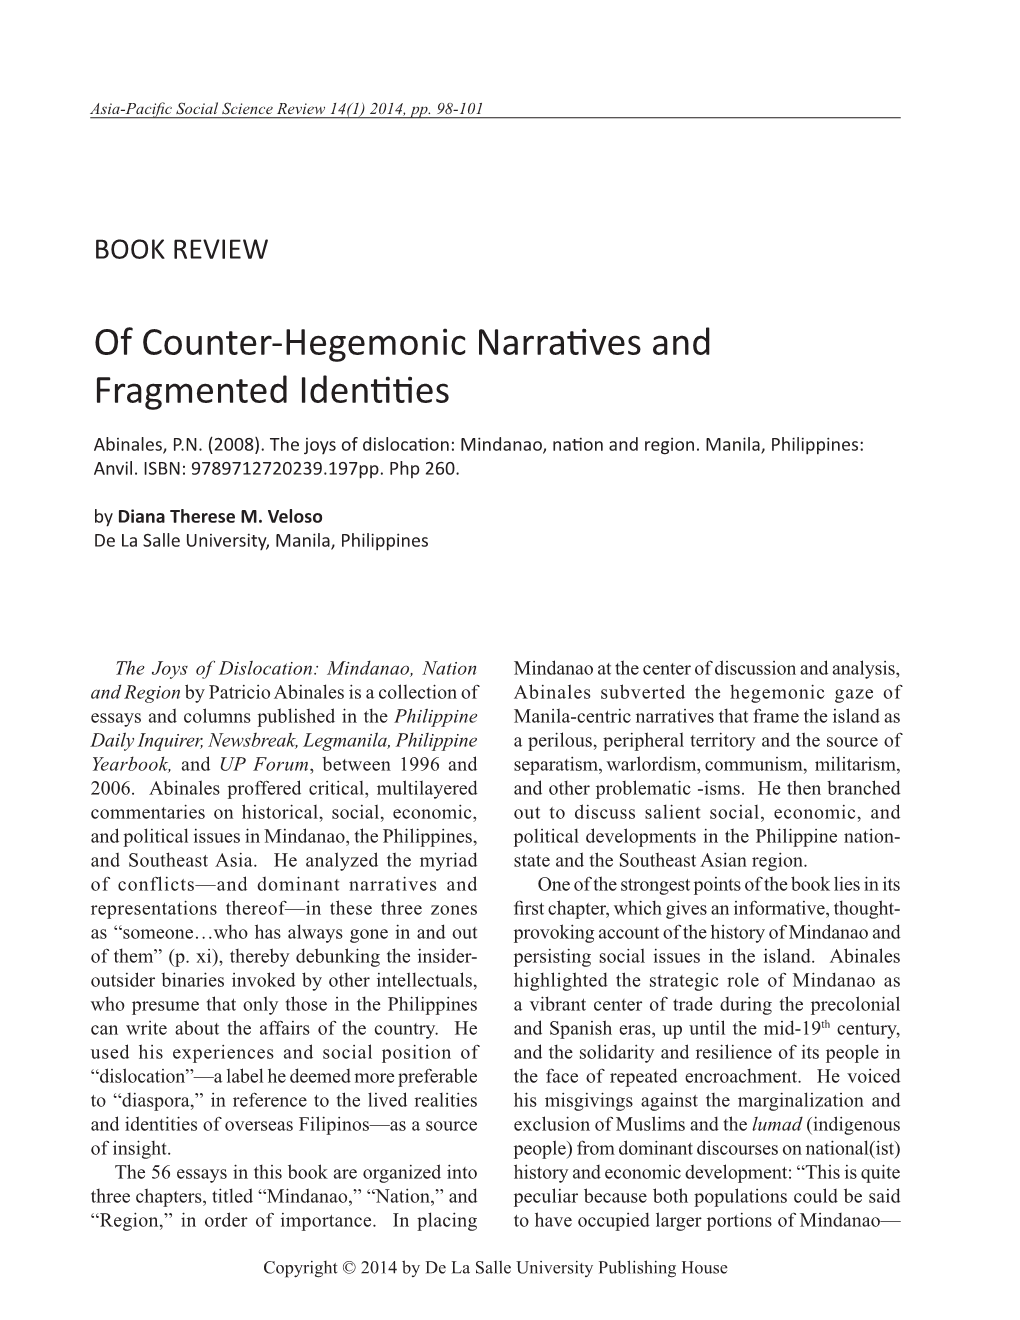 Of Counter-Hegemonic Narratives and Fragmented Identities